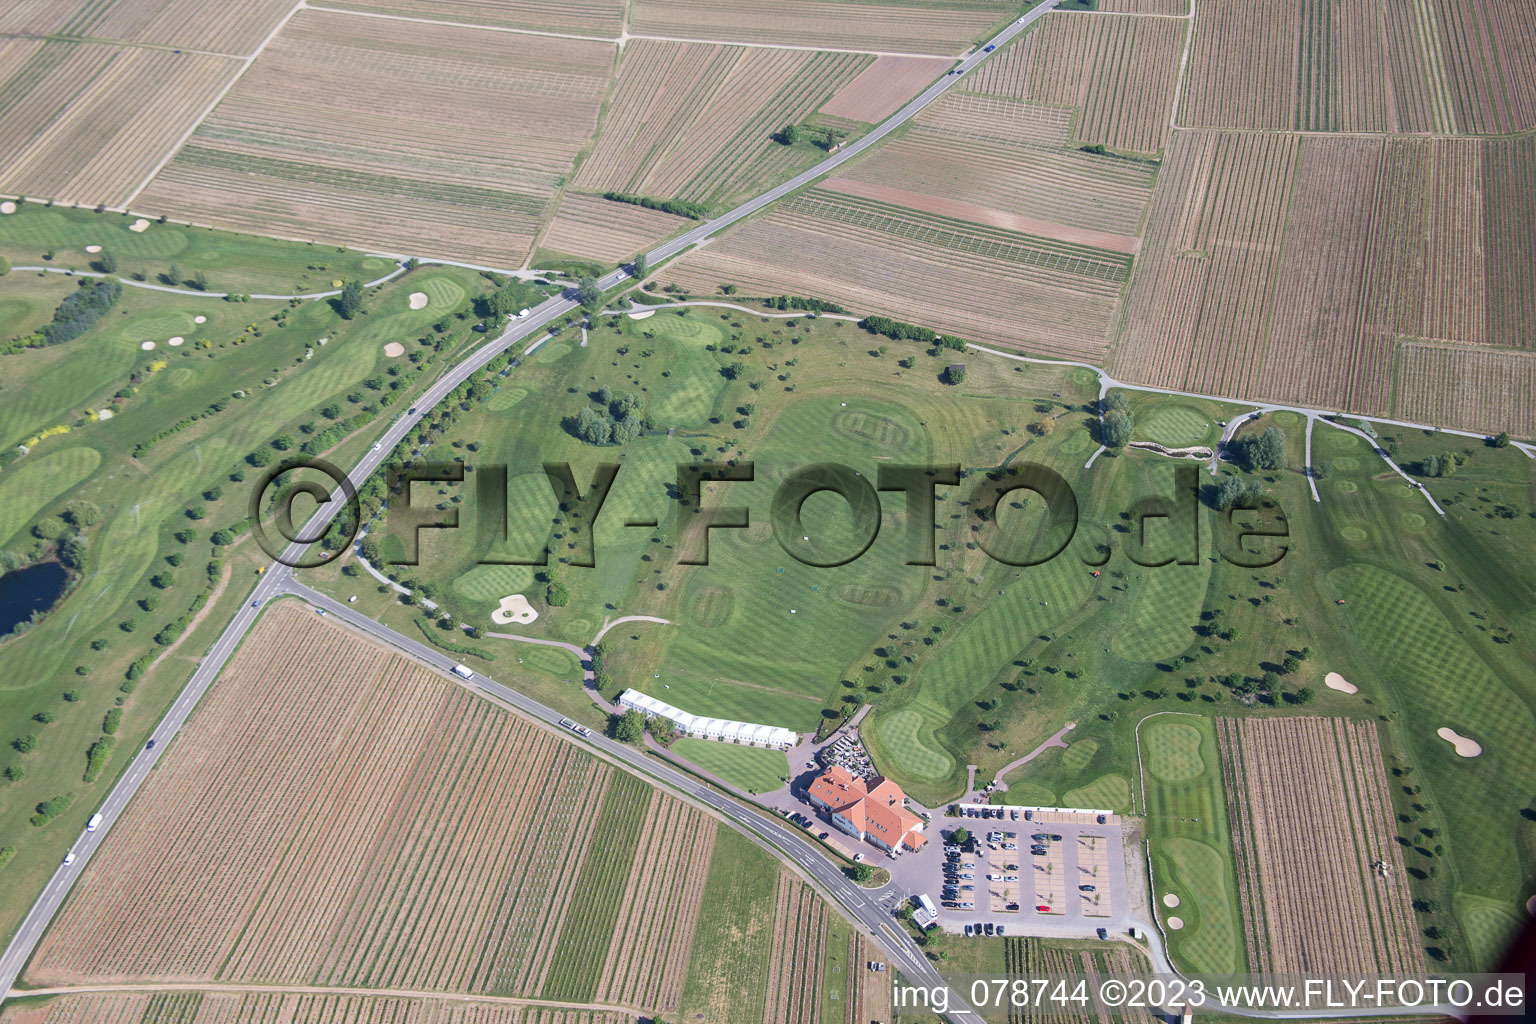 Golf course in Dackenheim in the state Rhineland-Palatinate, Germany from the drone perspective